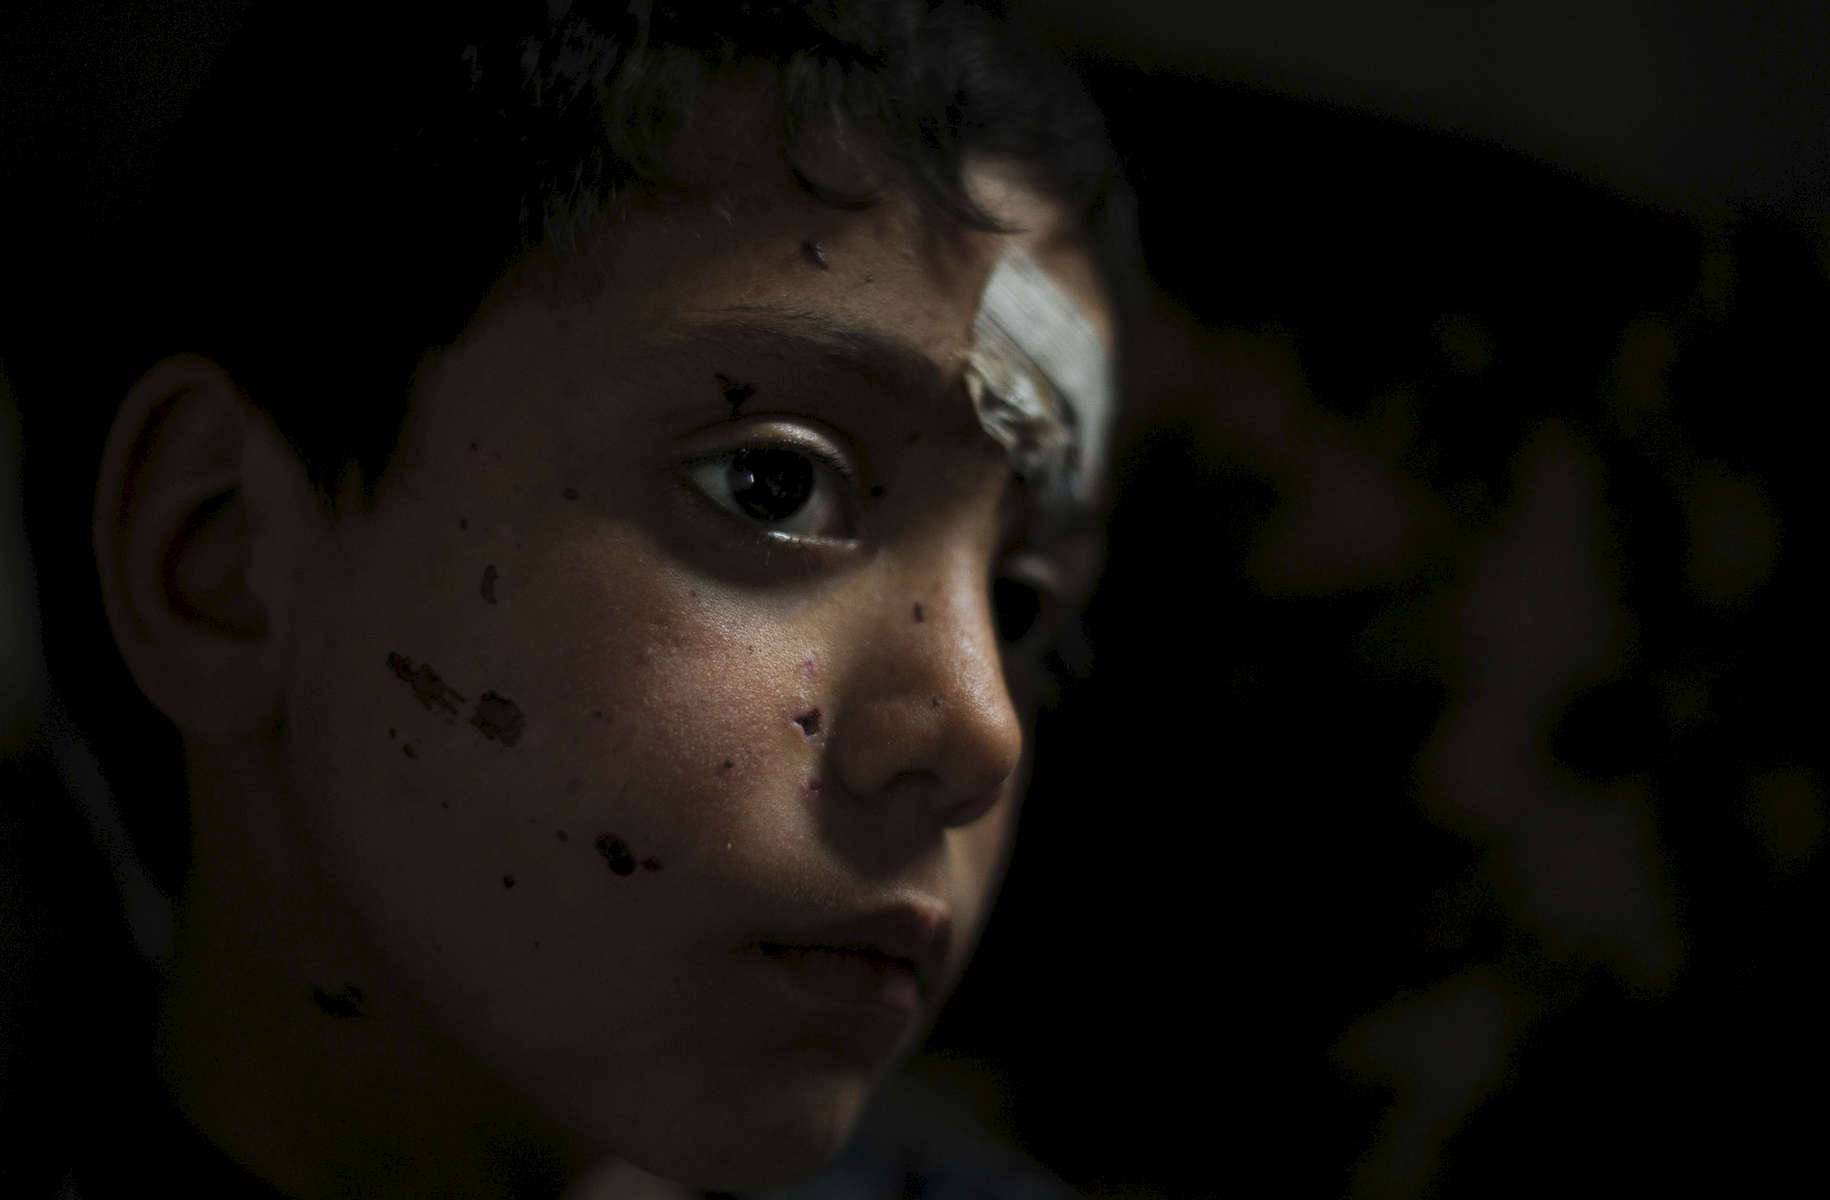 A nine year old Syrian child named Shadi was injured by shrapnel from an unidentified explosion while crossing the border to Lebanon. In the spring of 2012 there were less than 10,000 Syrian refugees registered in the country. By the end of the year that number had surged to more than 170,000. 